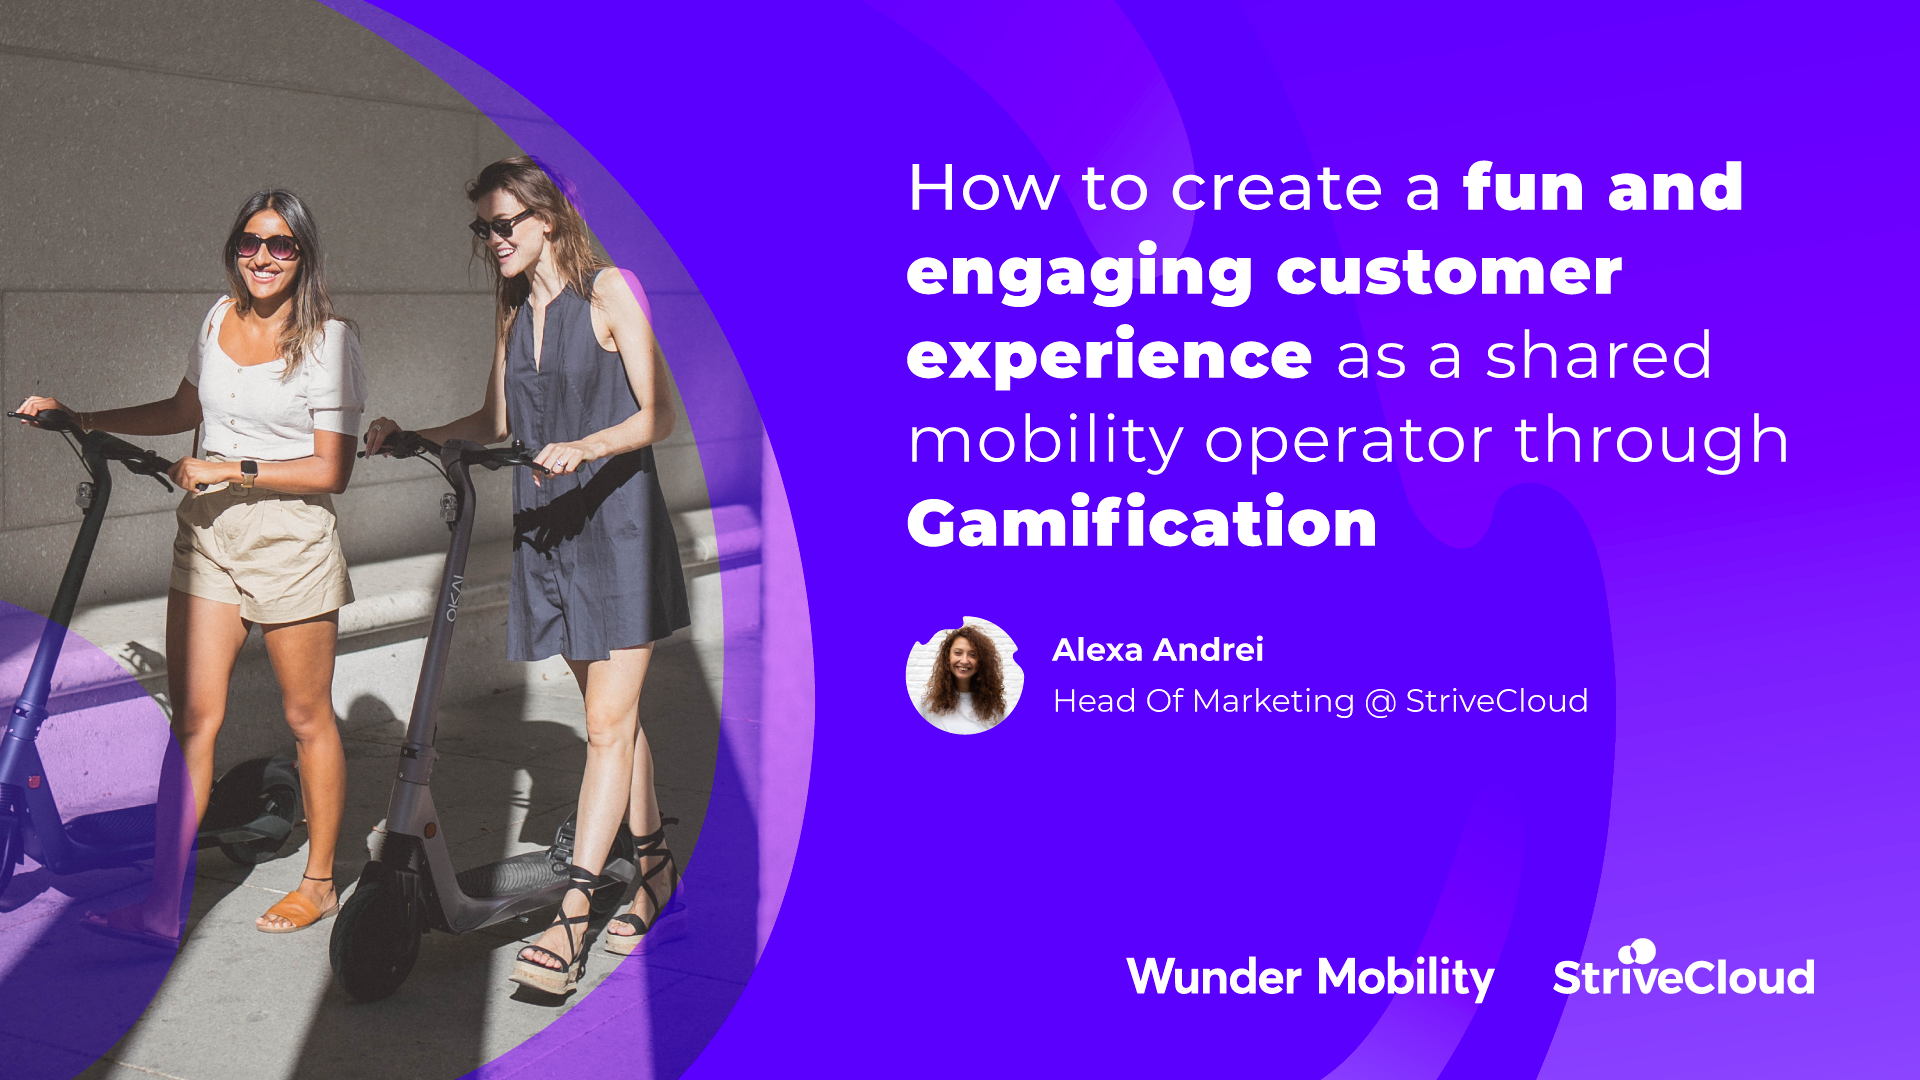 How to create a fun and engaging customer experience as a shared mobility operator through Gamification